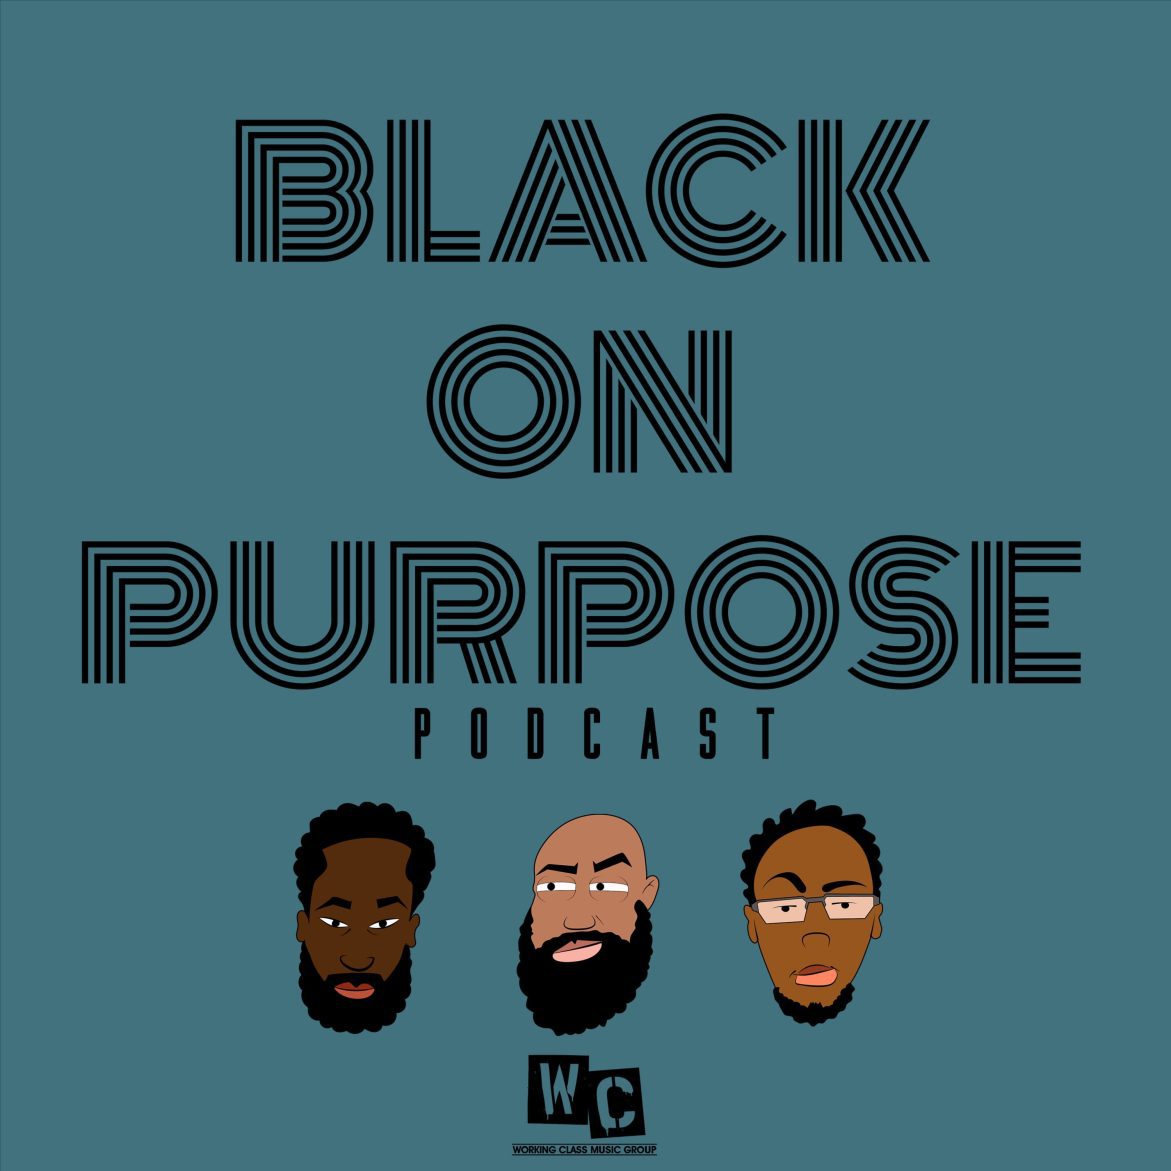 Black Podcasting - Episode 152: "If I Only Had A Grapple Hook"